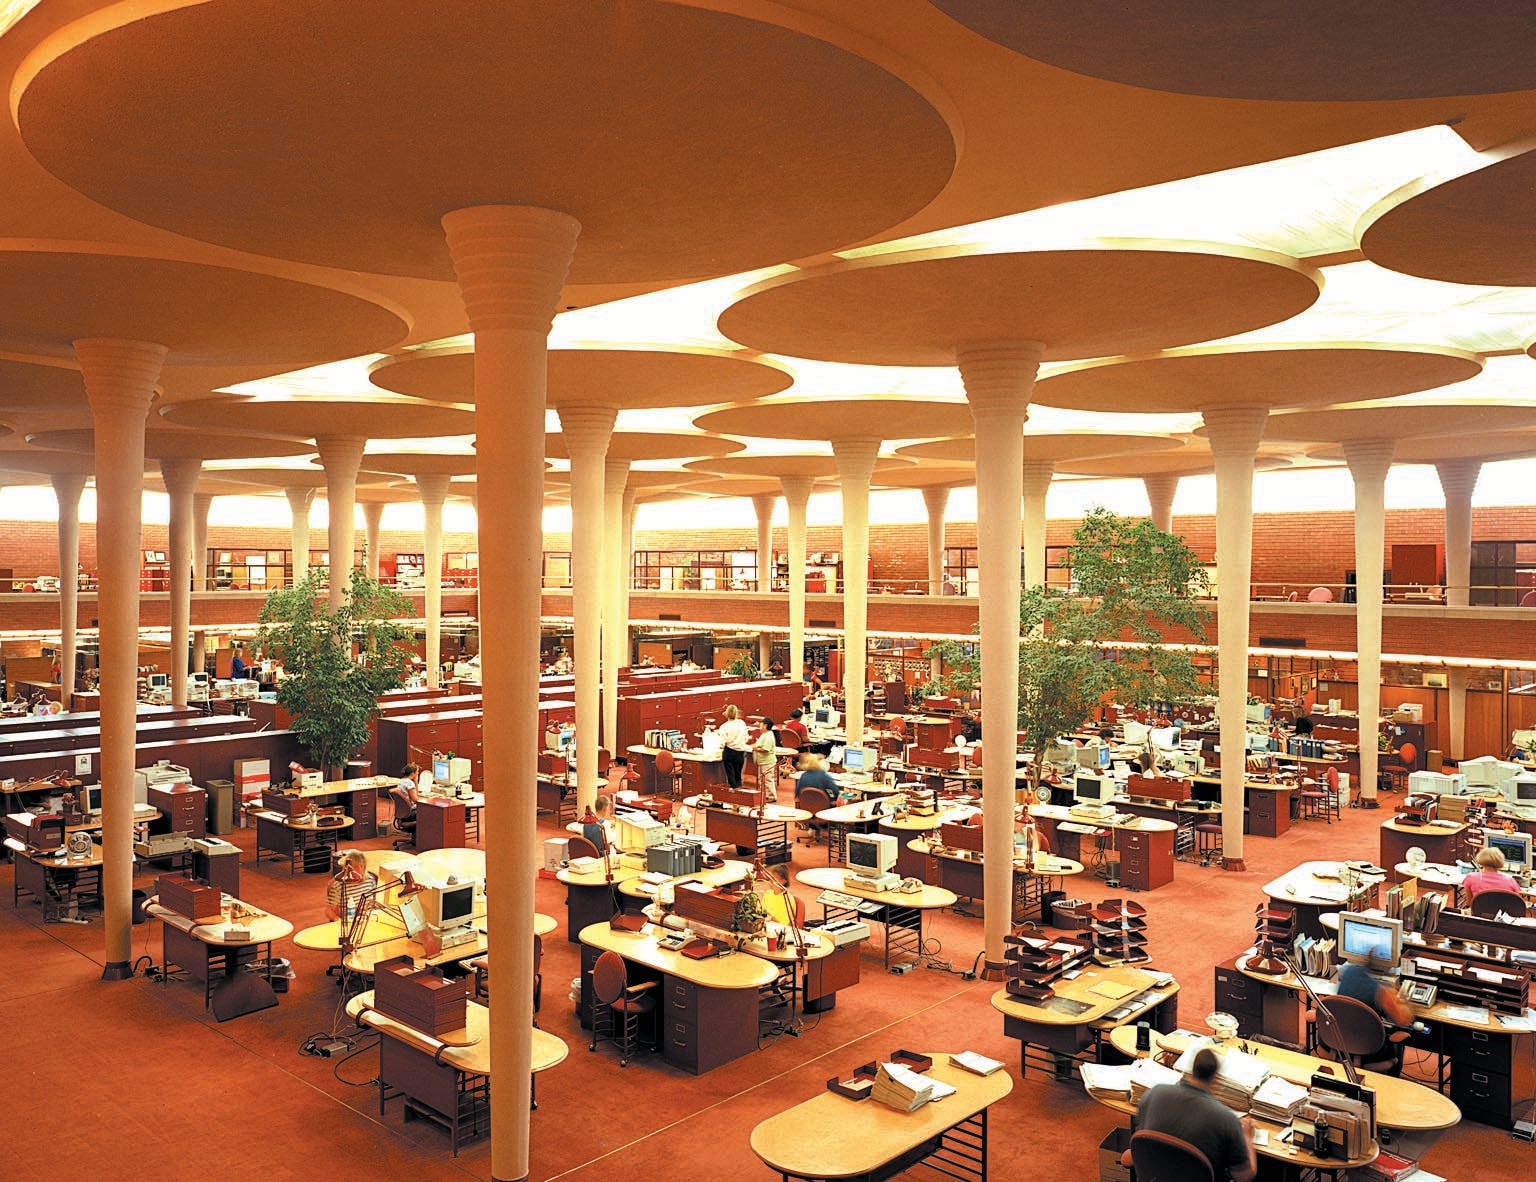 Fixing the Hated Open-Design Office - Scientific American